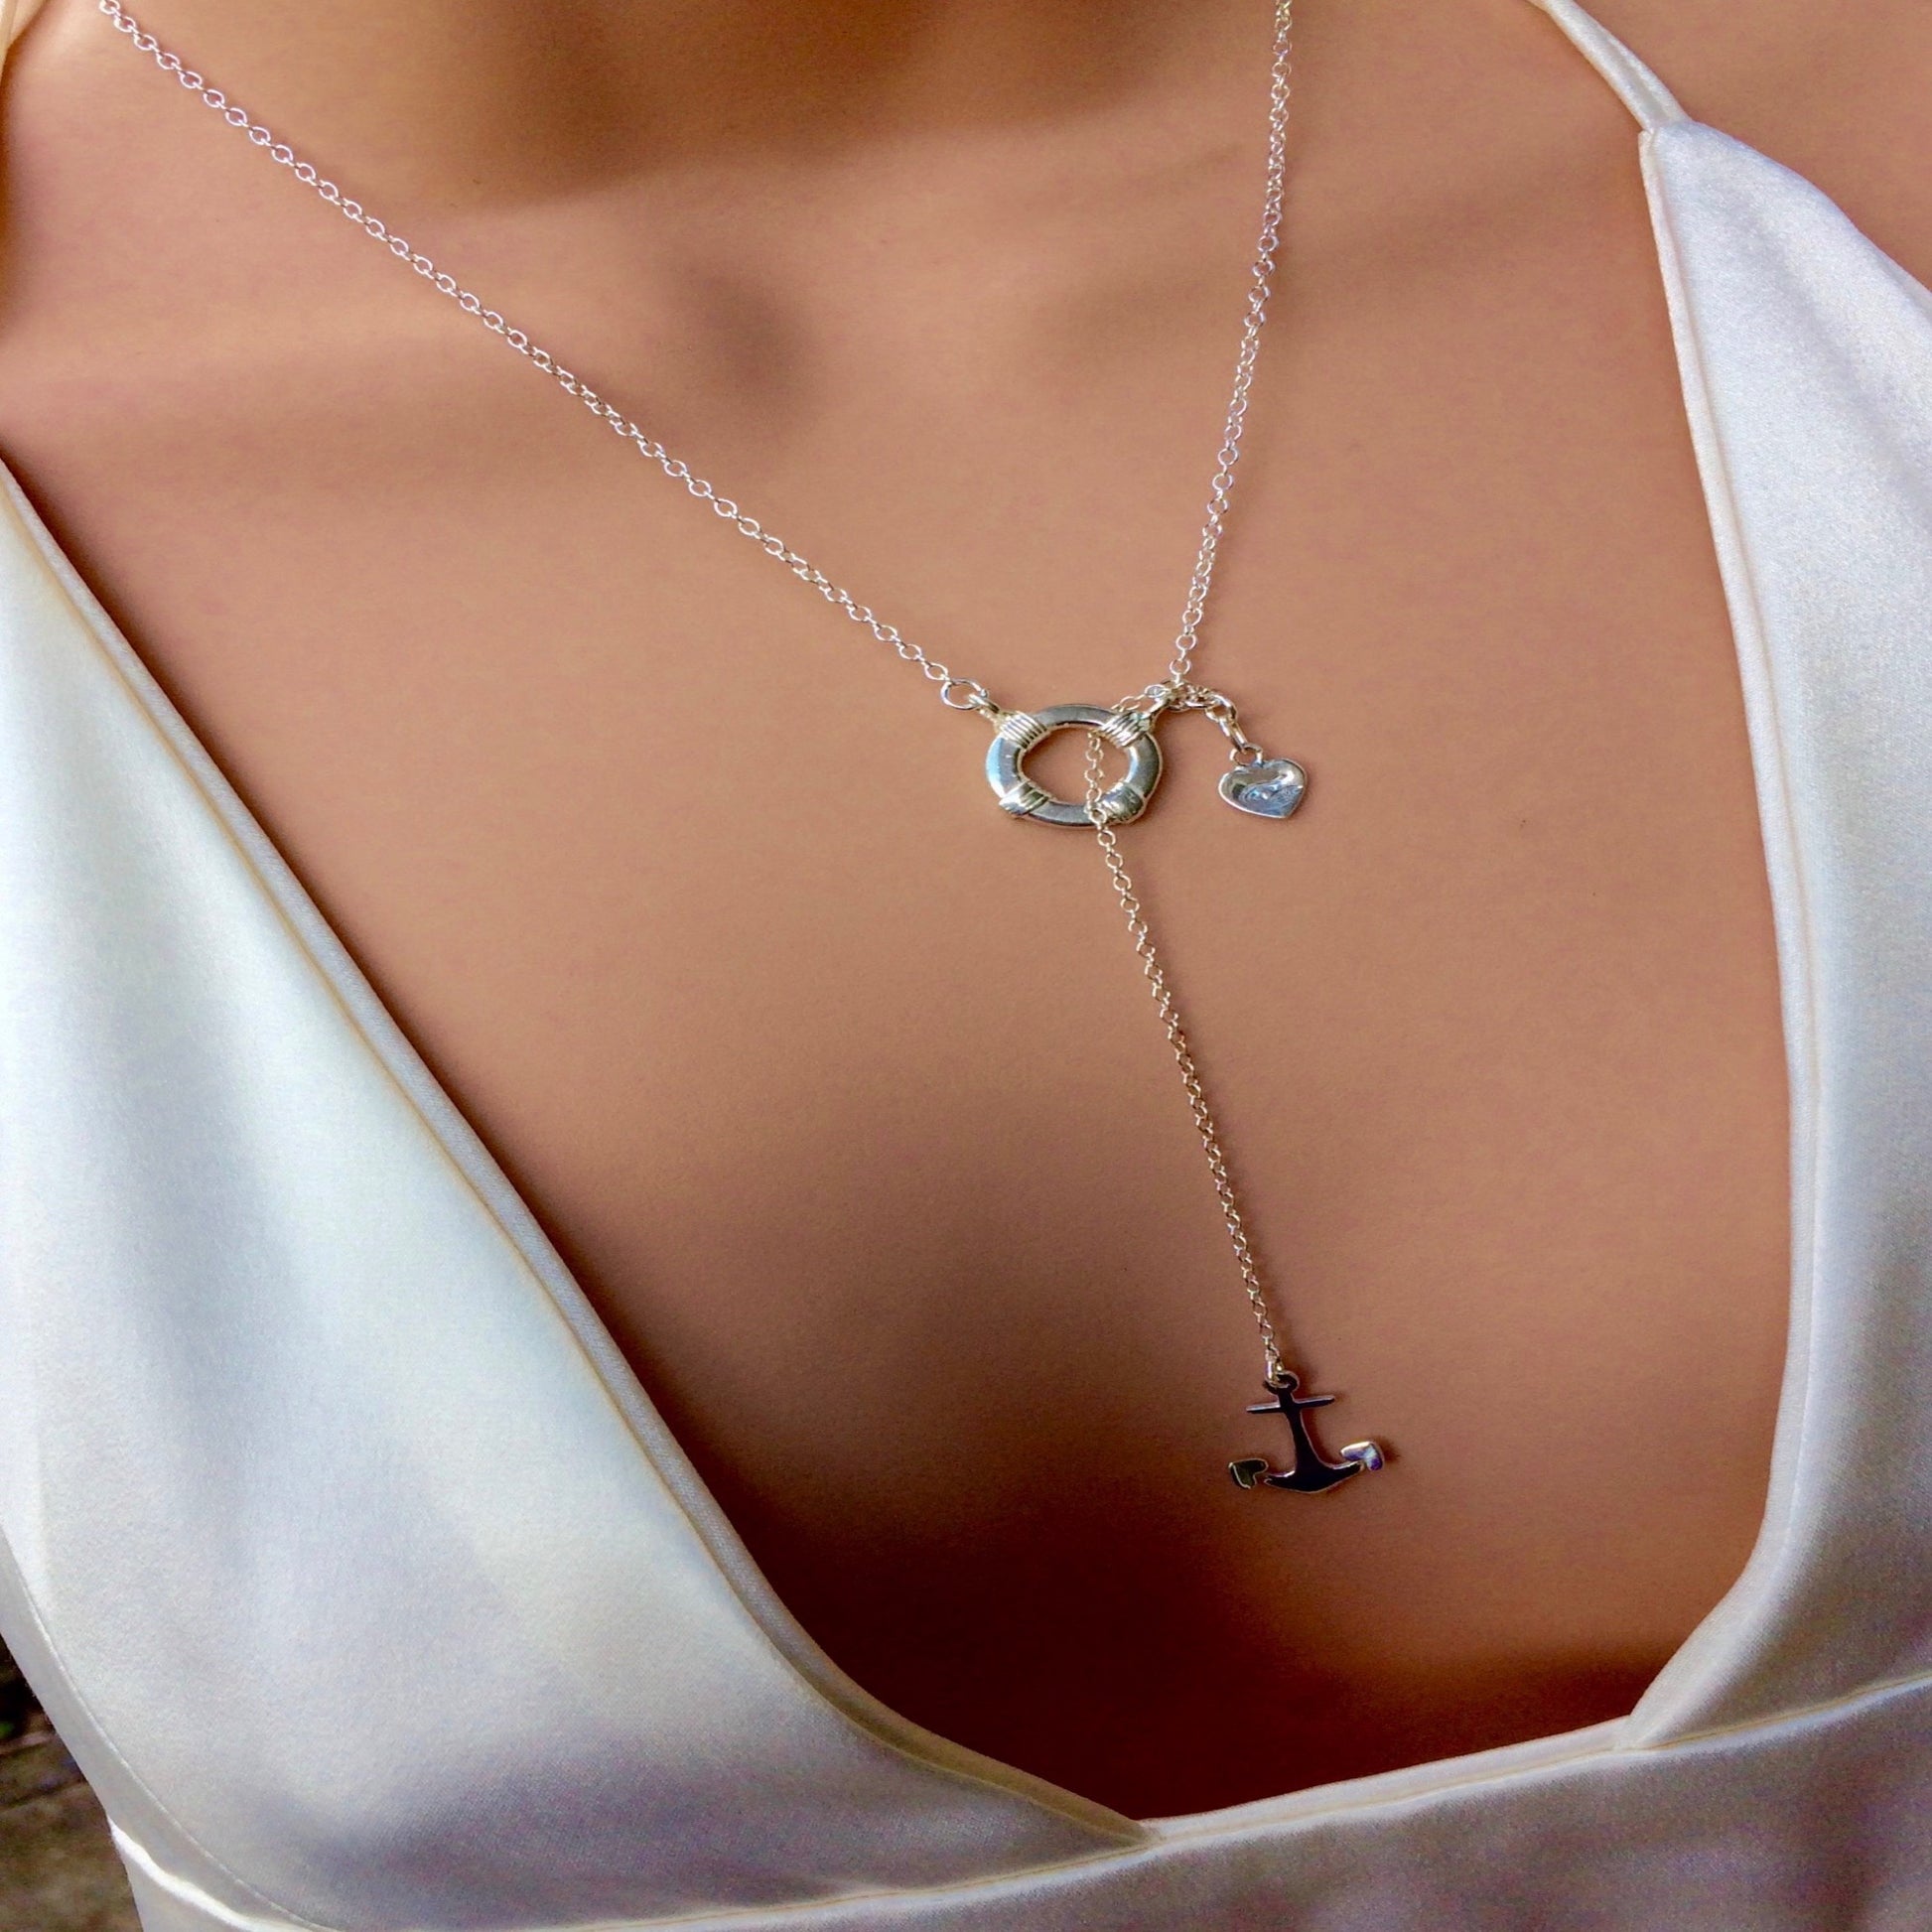 Anchor and lifebuoy necklace by Pa-pa